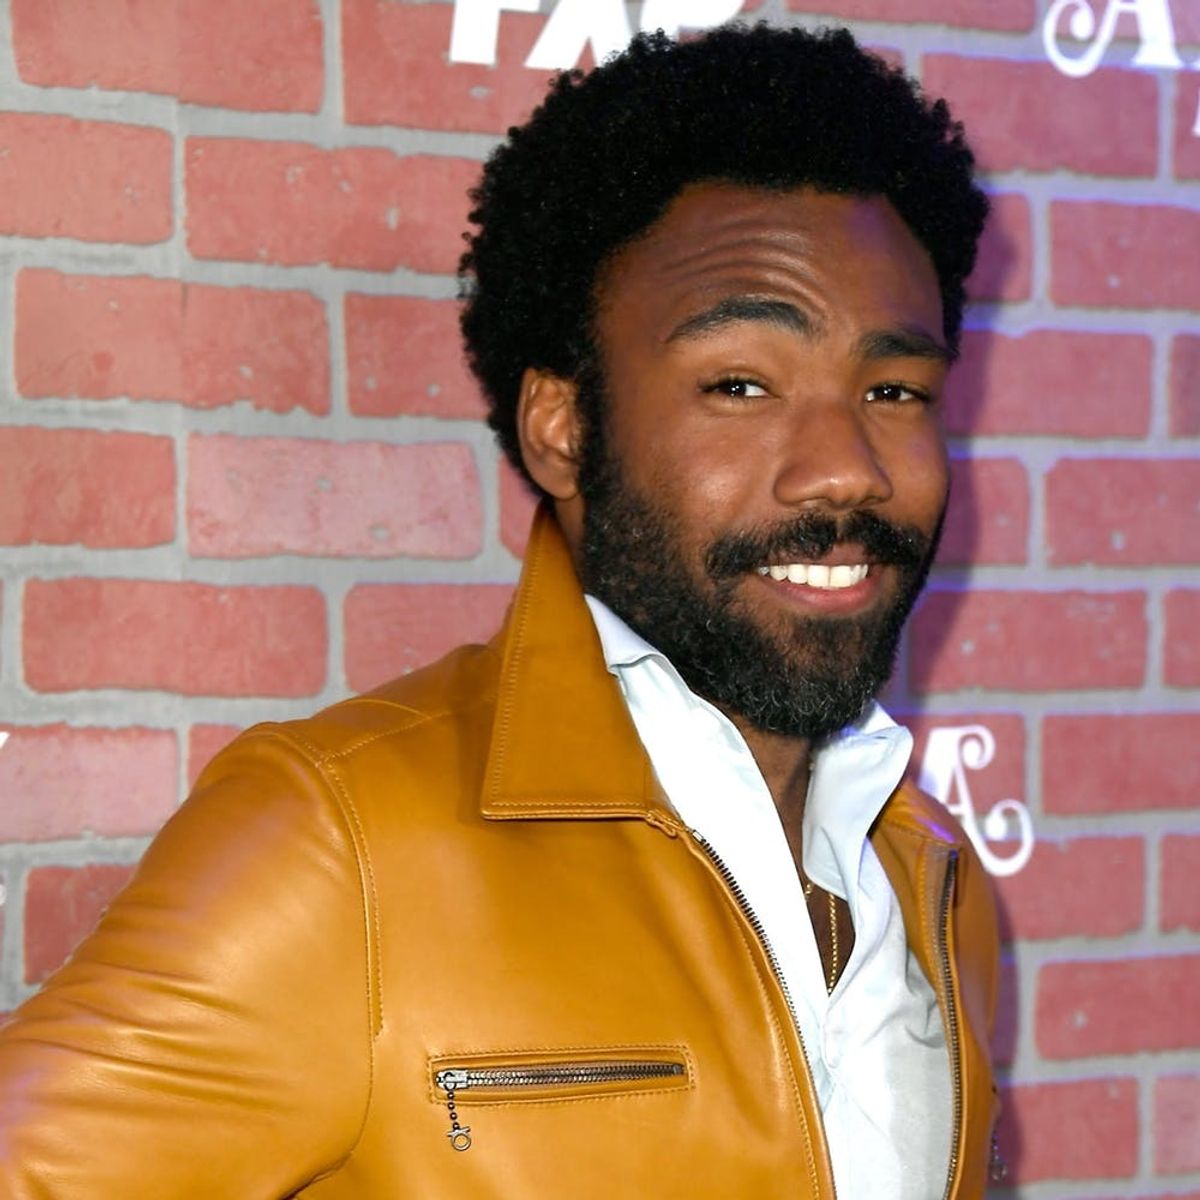 Donald Glover Bought More Than 100 Boxes of Girl Scout Cookies for This Sweet Reason